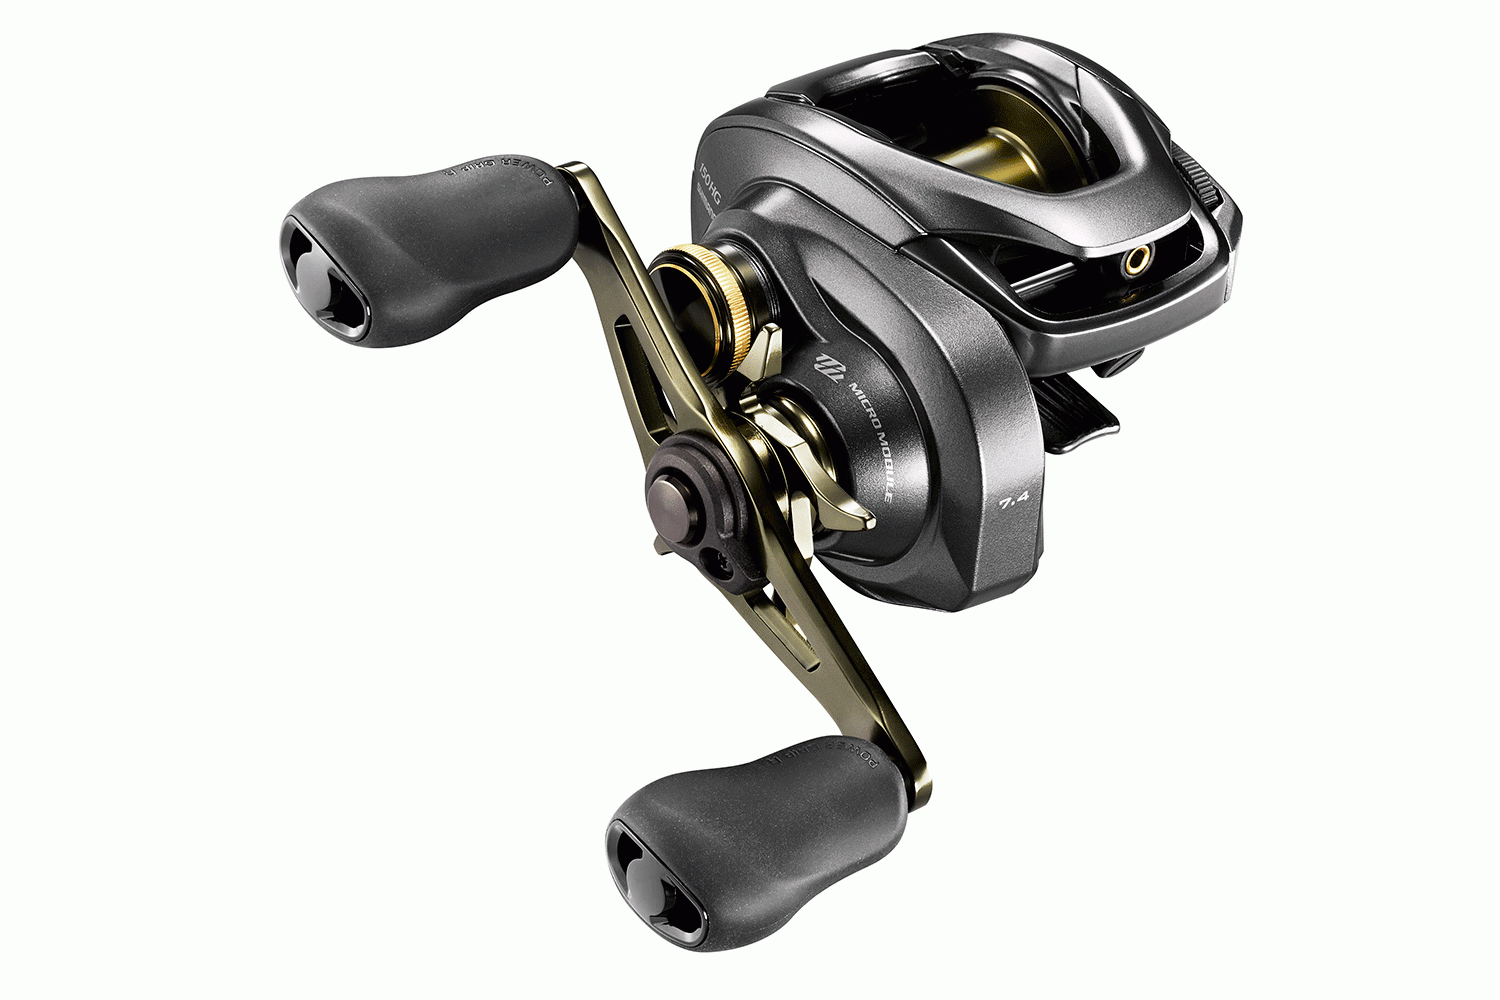 <p><b>Shimano Curado DC Baitcaster, $249.99</b></p> The Shimano Curado DC Baitcasting Reel delivers dependable durability and versatility expected from a quality reel. Designed with Digital Control braking technology, this system uses a microcomputer to monitor spool speed up to 1,000 times every second to apply the ideal amount of brake and prevent backlash, while maximizing the distance. Less thumbing and easy casting makes the Shimano Curado DC baitcaster perfect for newer and experienced anglers alike.<br> <a href=